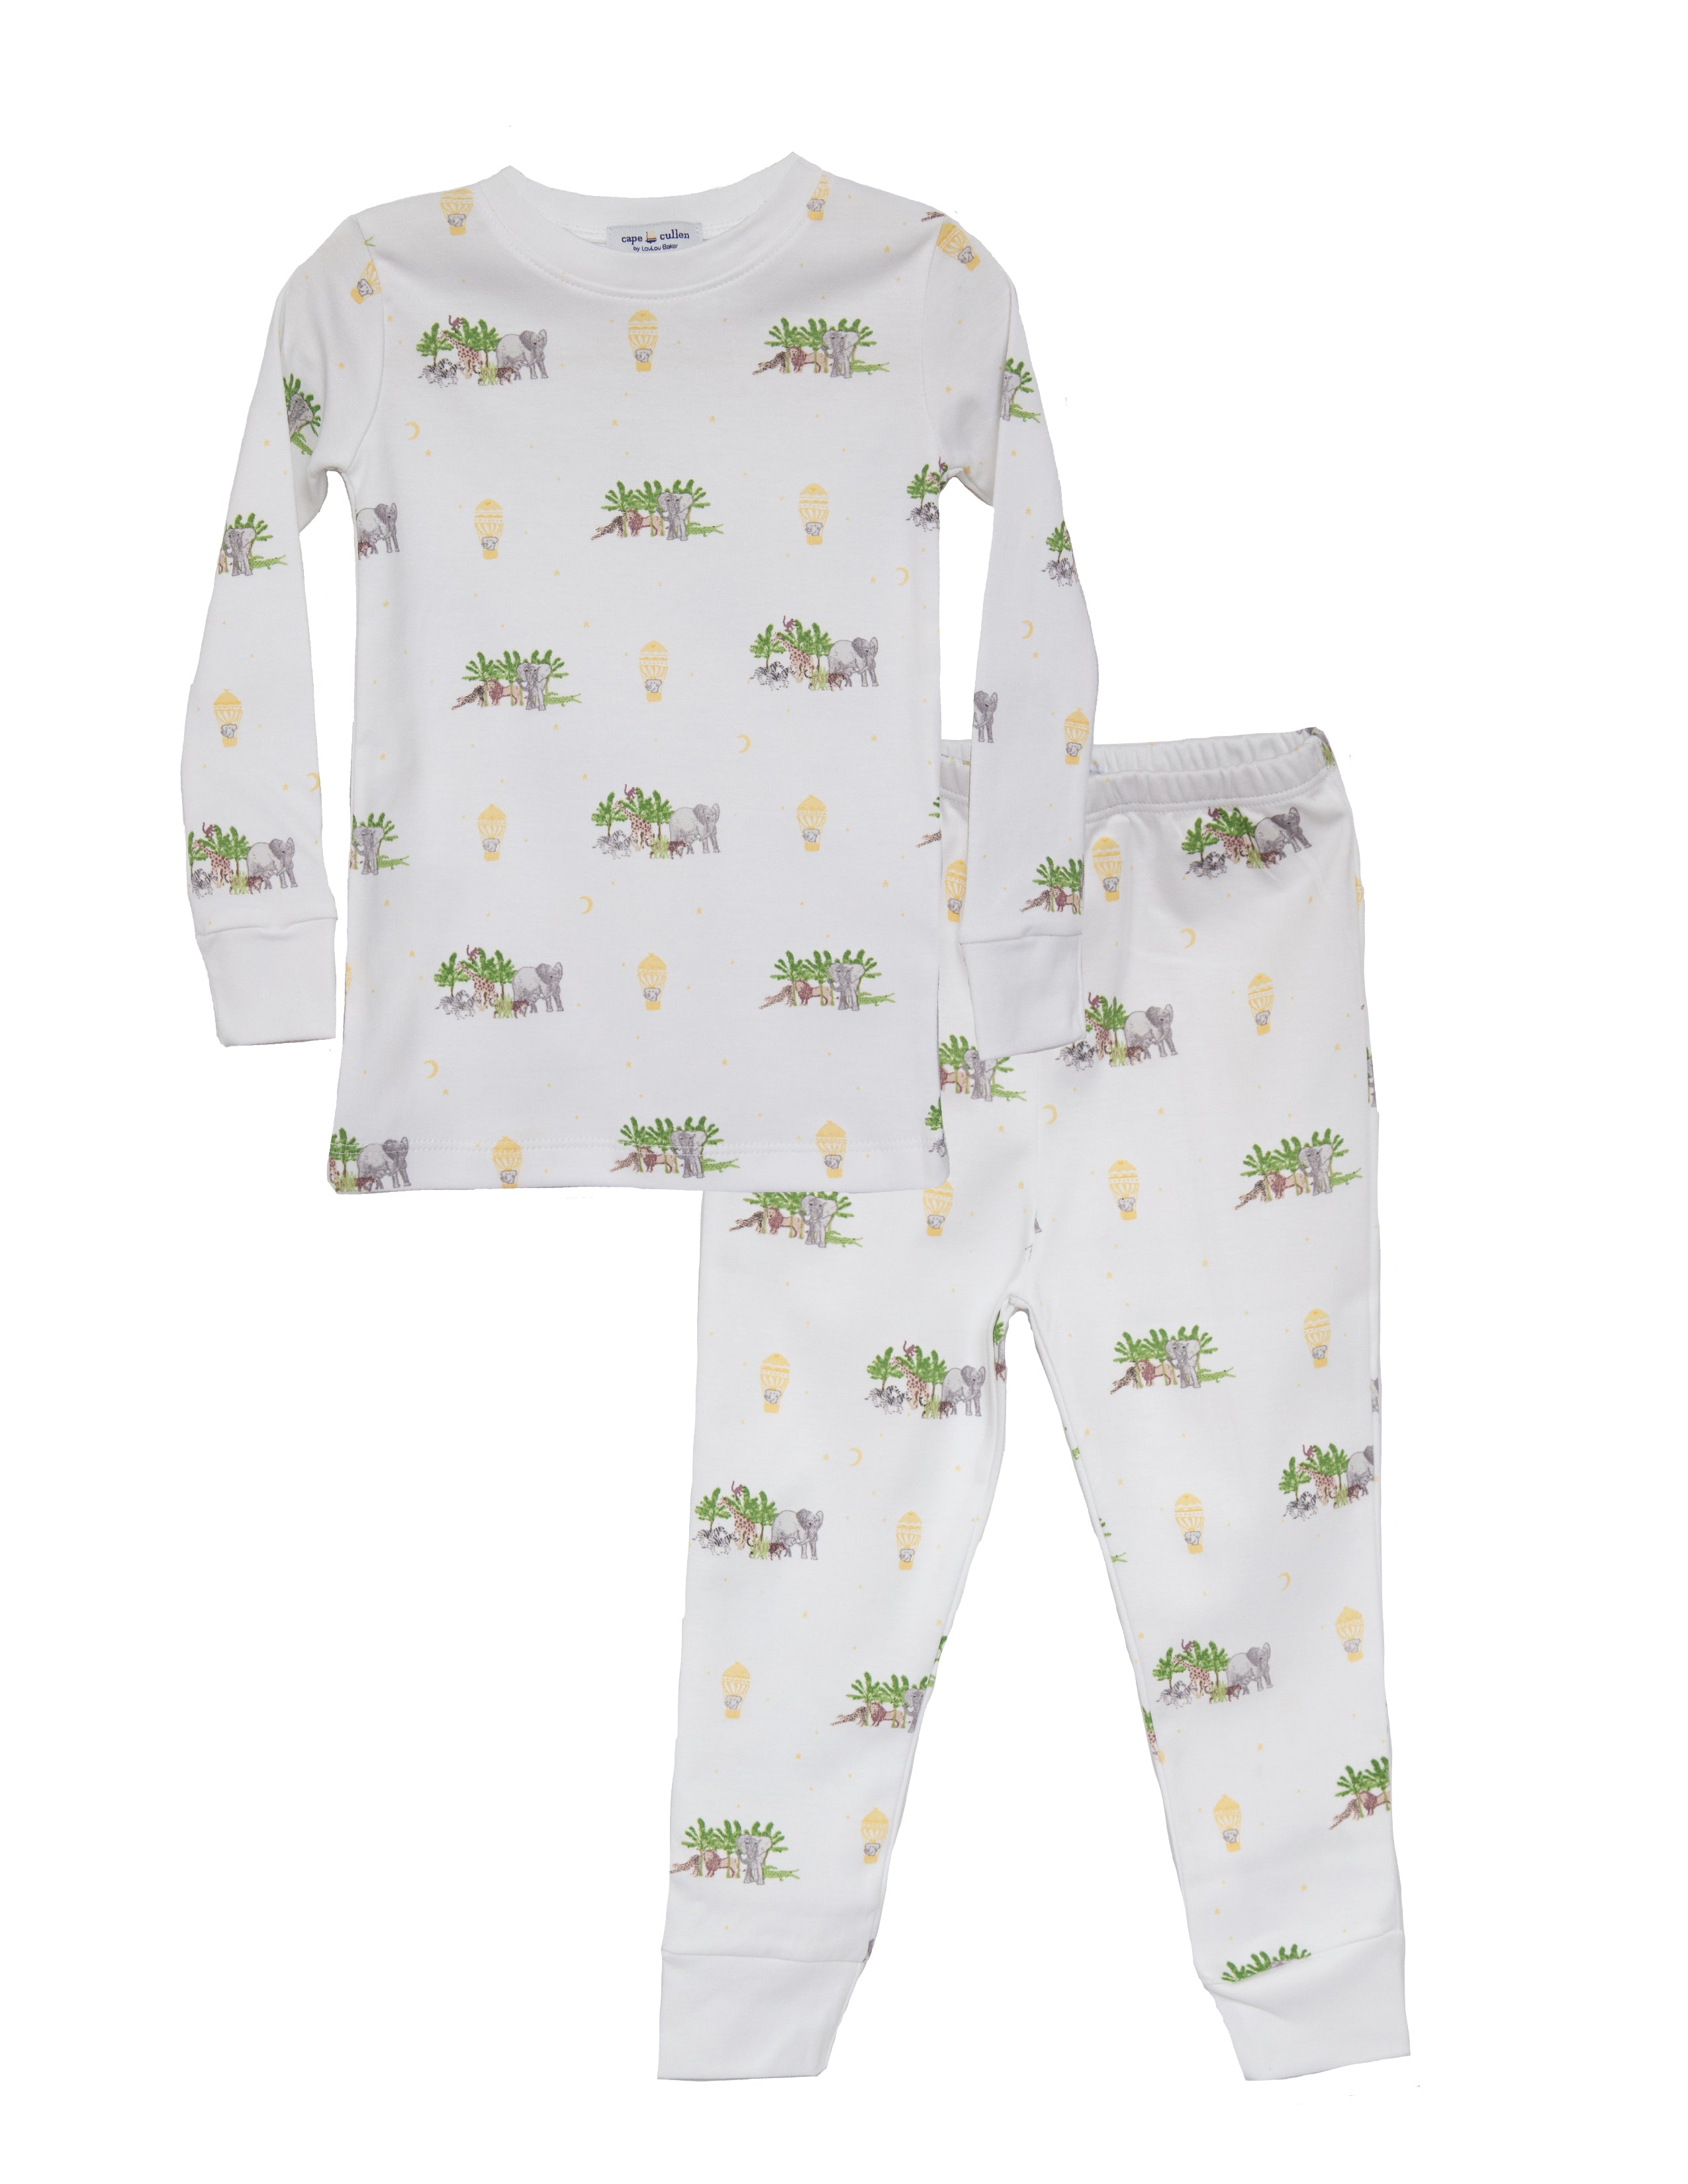 Out of Africa Pima Two Piece Pajama Set